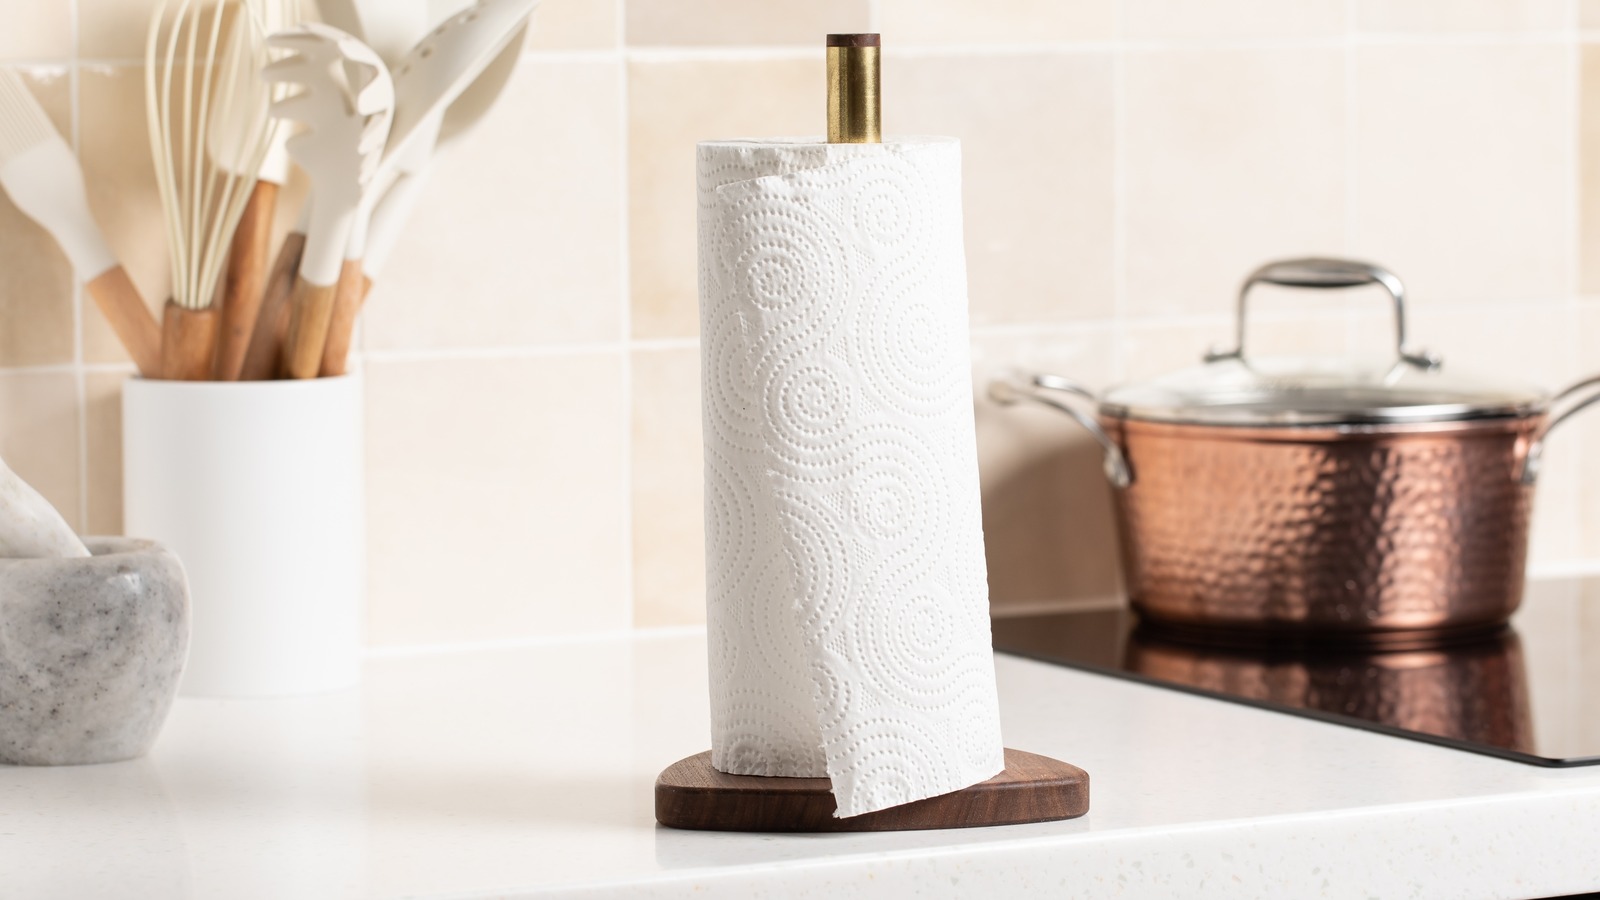 https://www.housedigest.com/img/gallery/clever-ways-to-use-paper-towel-holders-around-the-house/l-intro-1700591383.jpg